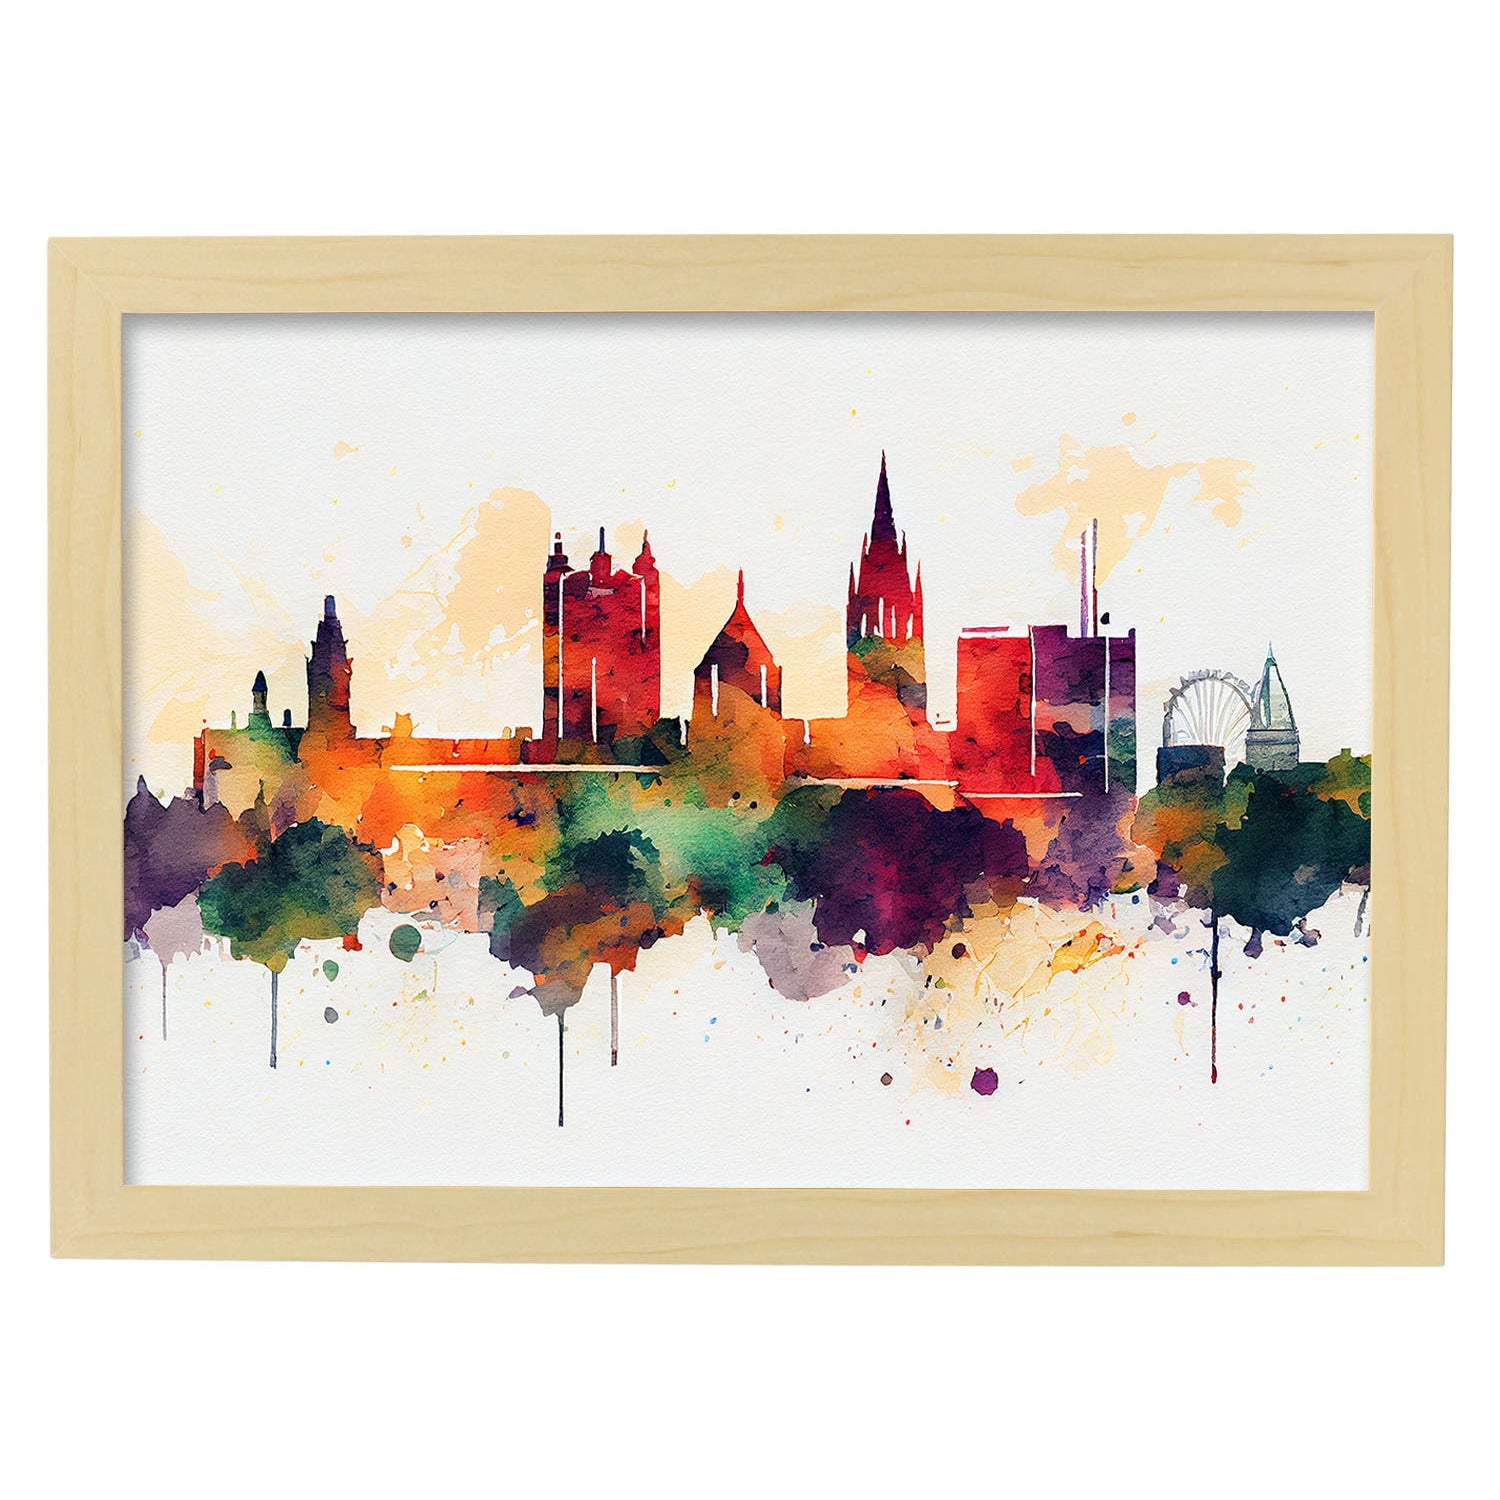 Nacnic watercolor of a skyline of the city of Cardiff. Aesthetic Wall Art Prints for Bedroom or Living Room Design.-Artwork-Nacnic-A4-Marco Madera Clara-Nacnic Estudio SL